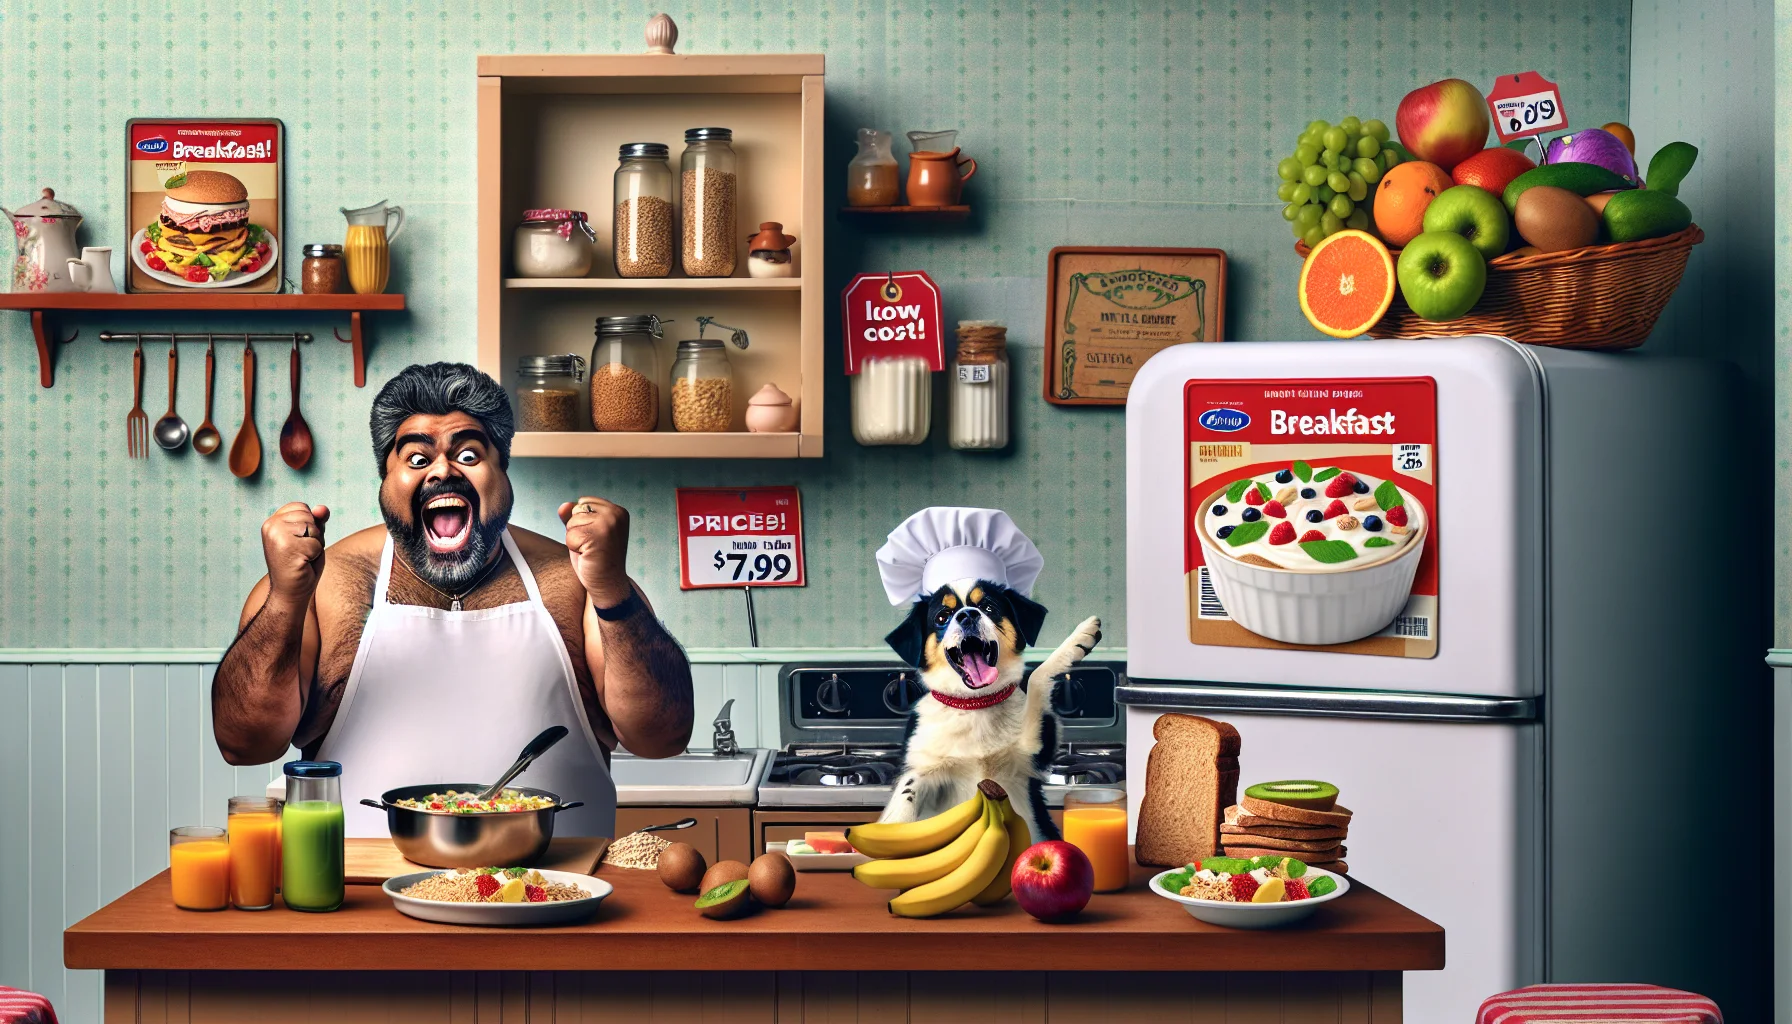 Create a humorous and lifelike scene showcasing the significance of having breakfast. In the image, depict a broad-shouldered man of Hispanic descent enthusiastically making breakfast, full of healthy ingredients like fruits, whole grains, and low-fat yogurt, in a small, thrifty kitchen. To emphasize the low-cost aspect, show prices tags on the food items depicting surprisingly low numbers. To add humor, illustrate a thrilled dog wearing a chef's hat, attempting to help the man by trying to reach the kitchen countertop.